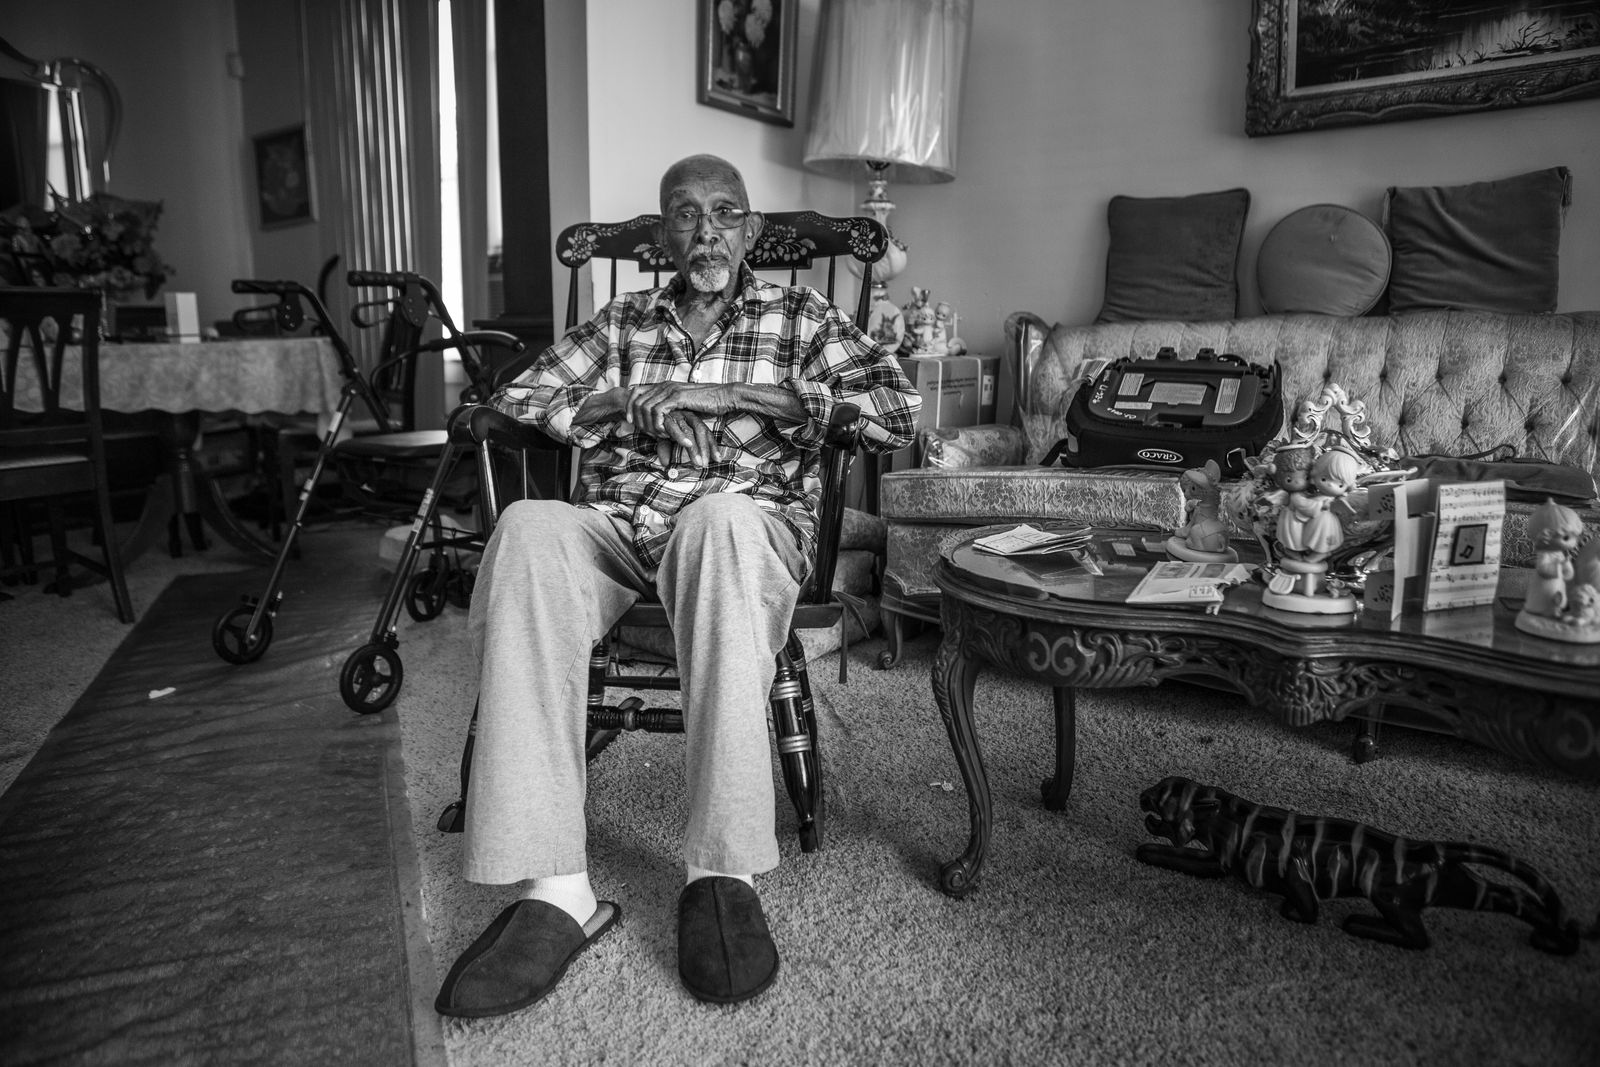 © JANICE MILHEM - Thomas in his east side home discusses his time serving in the Army during both WWI and WWII.